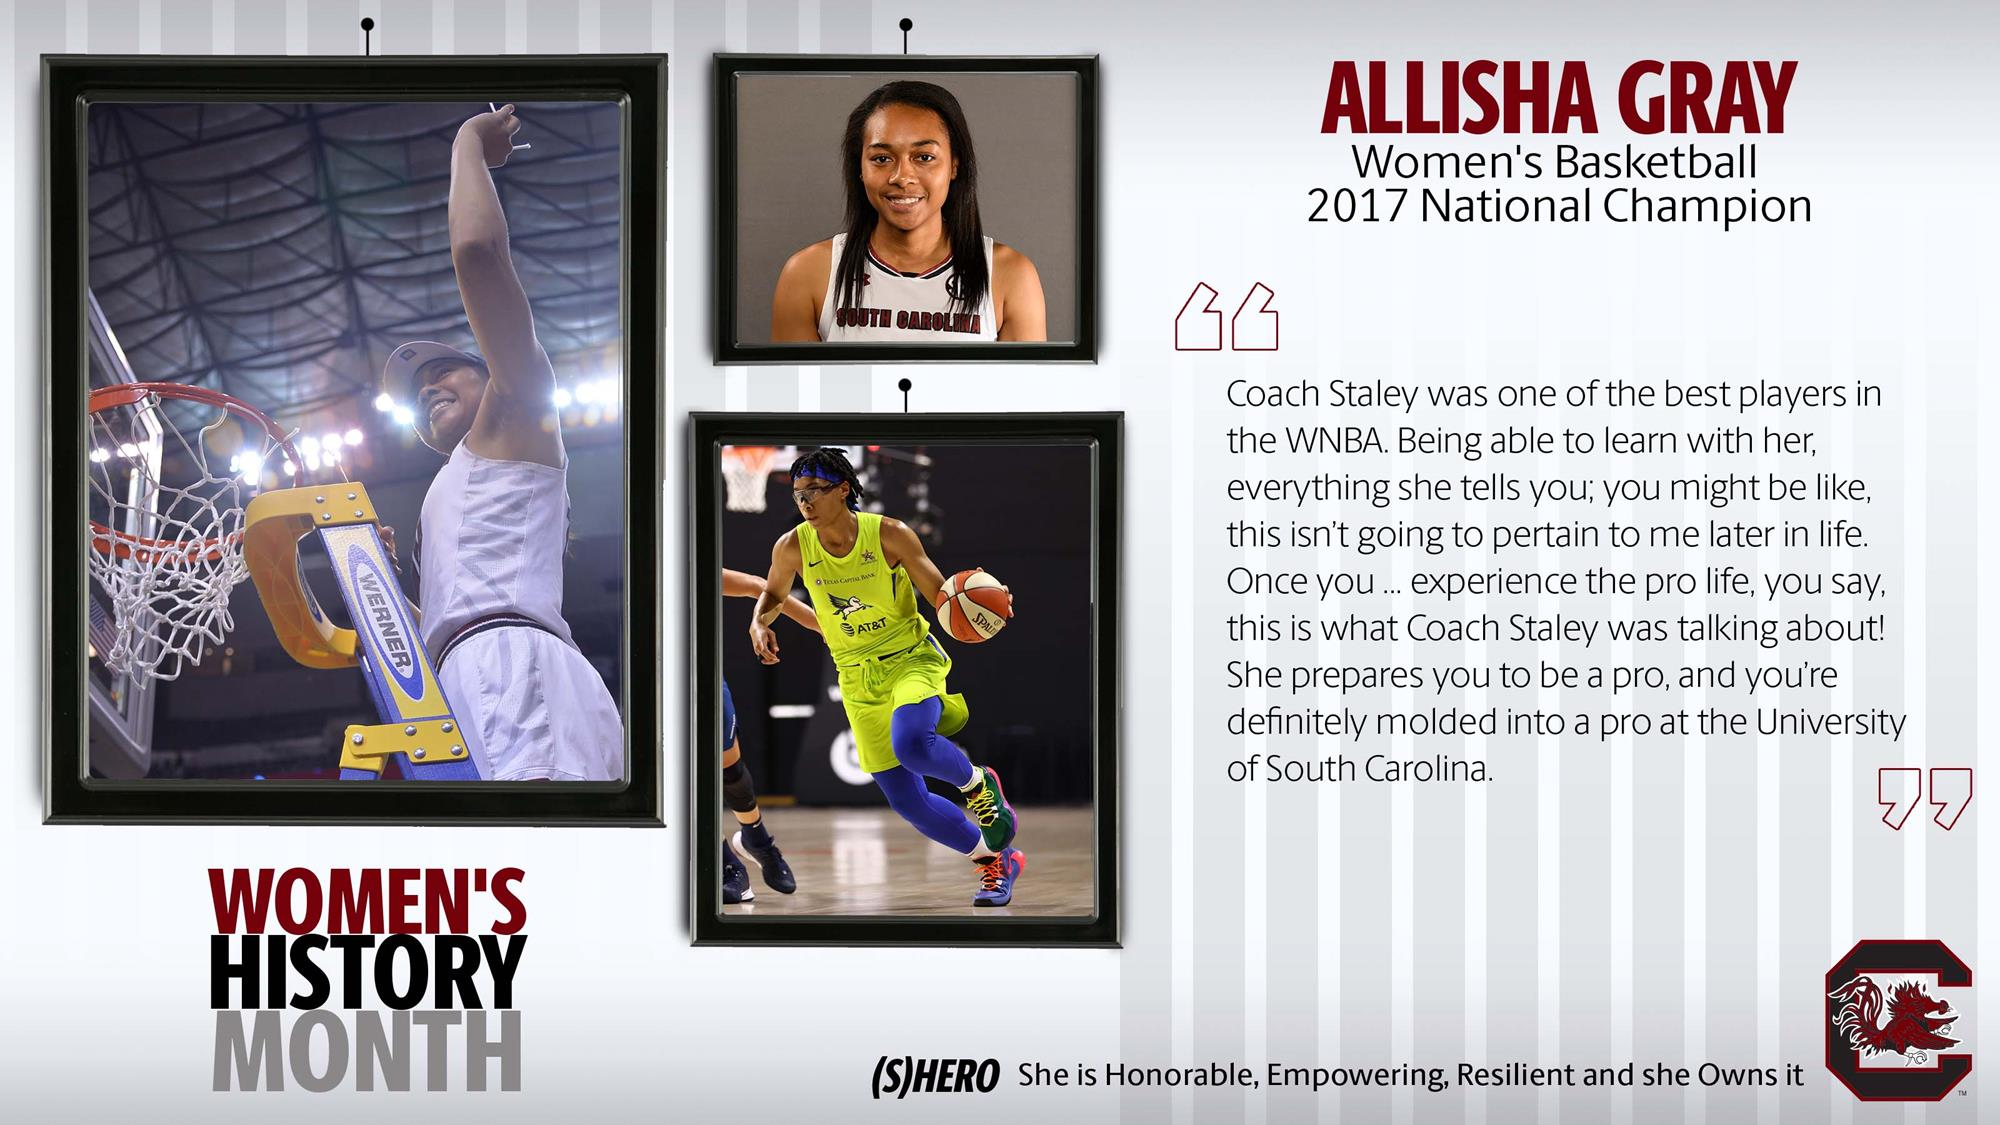 Allisha Gray Encourages Others to Be Great